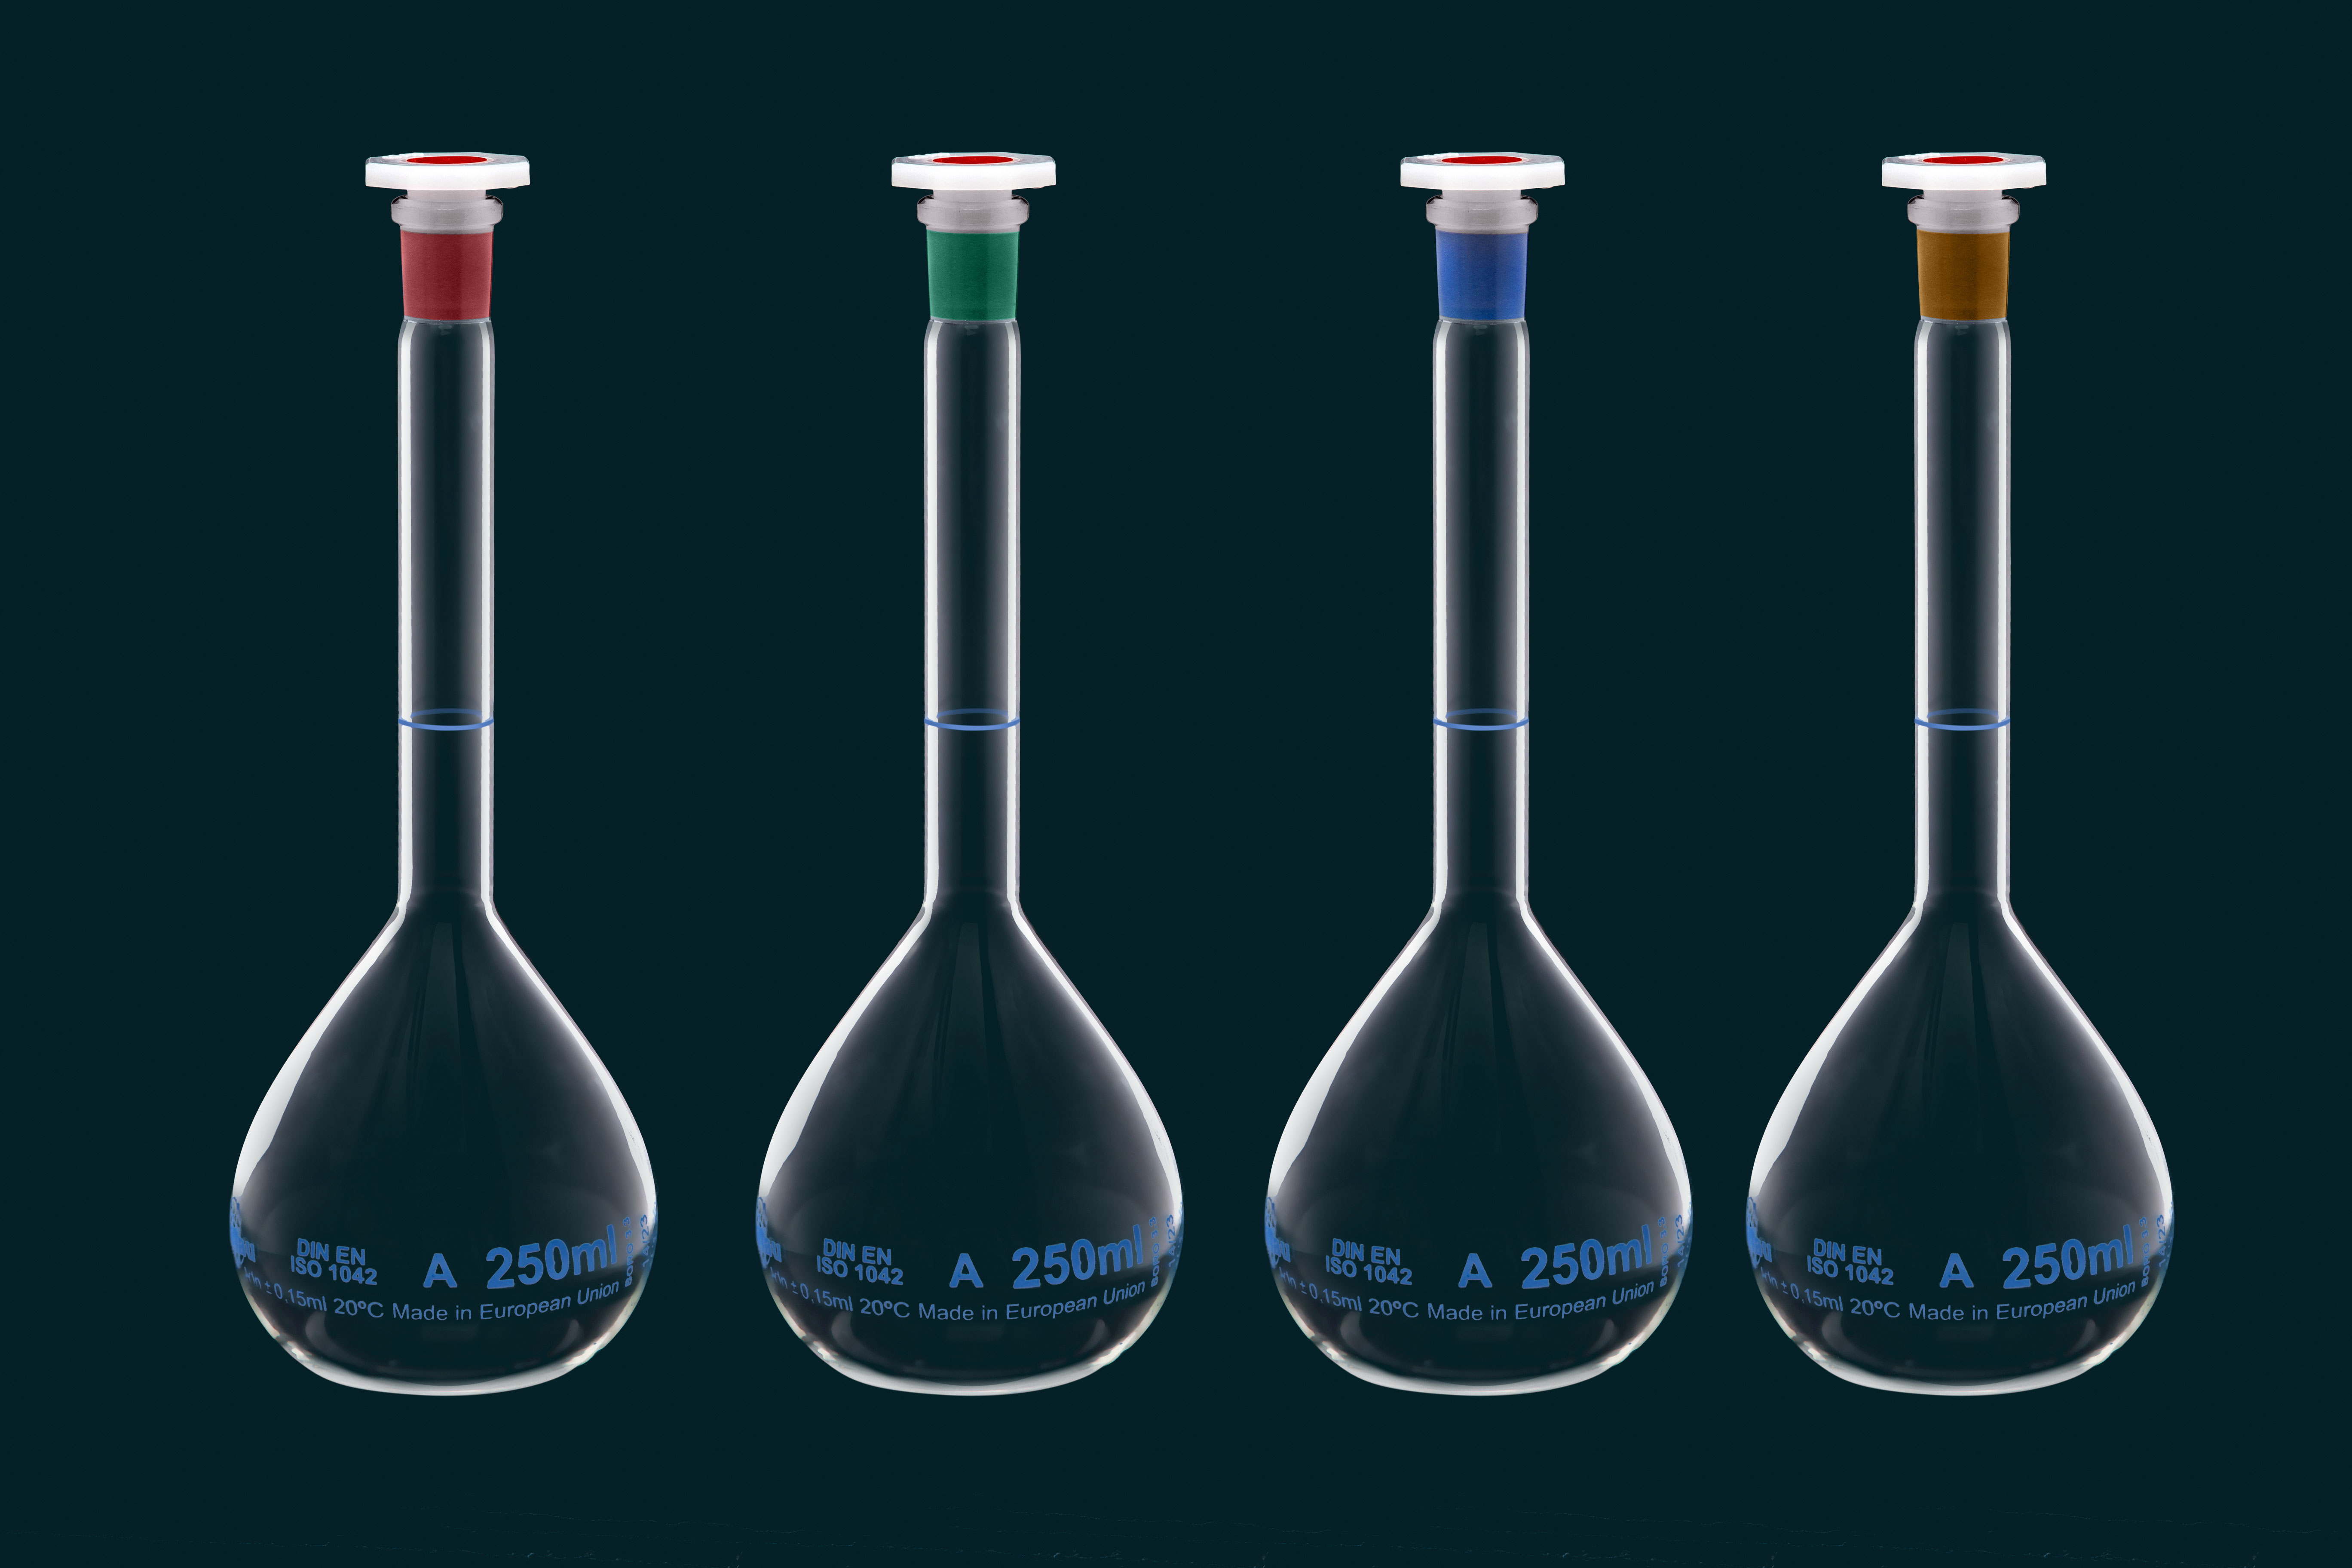 Volumetric flask with red neck, Class A, 500 ml, with PE stopper, lot number and certificate of conformity